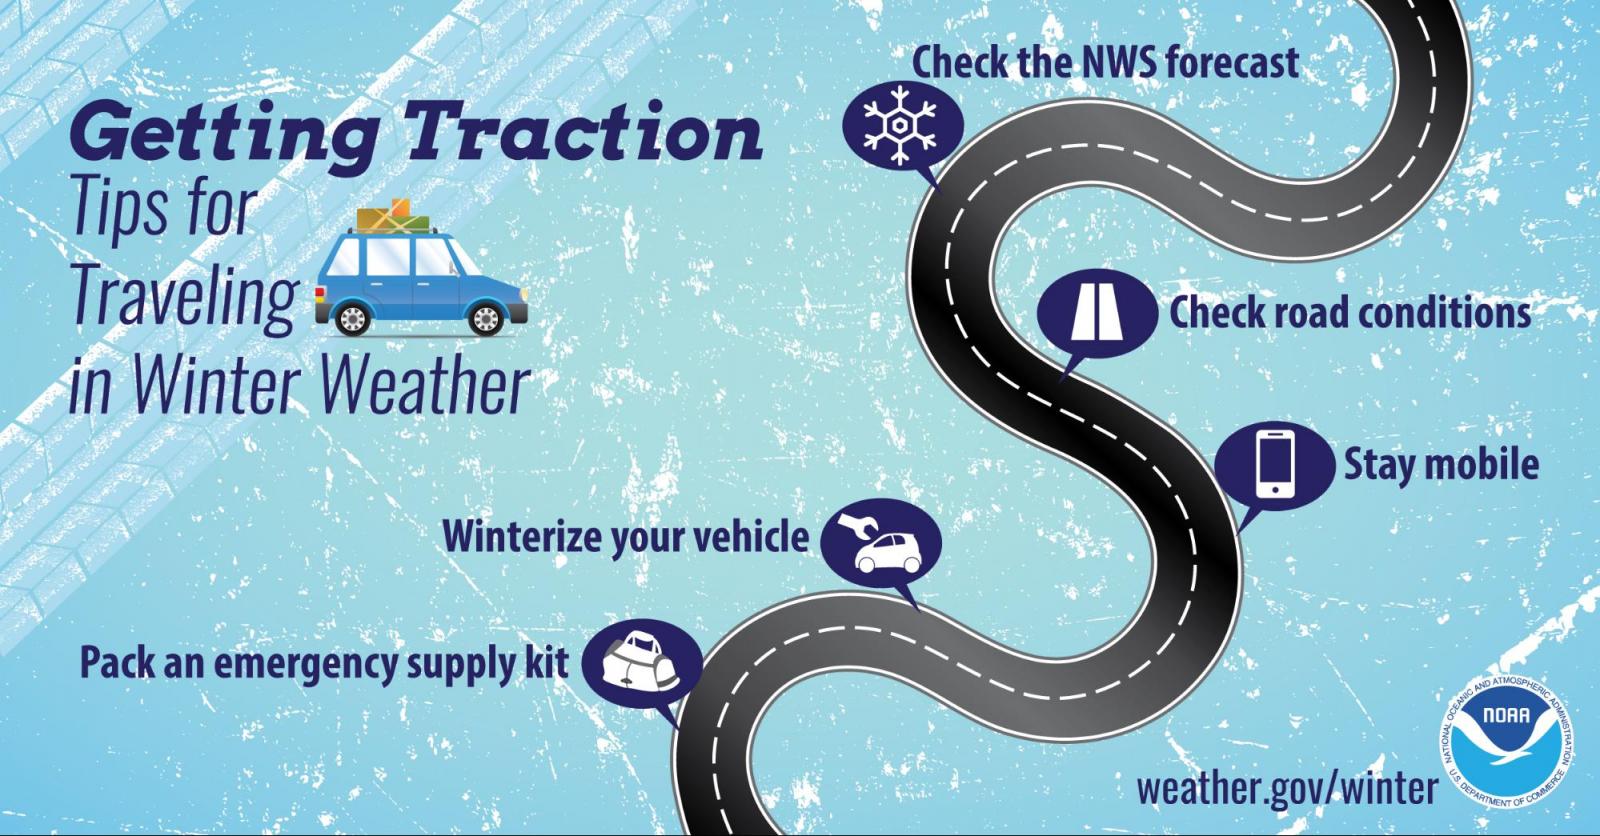 Getting Traction: Tips for Travelling in Winter Weather